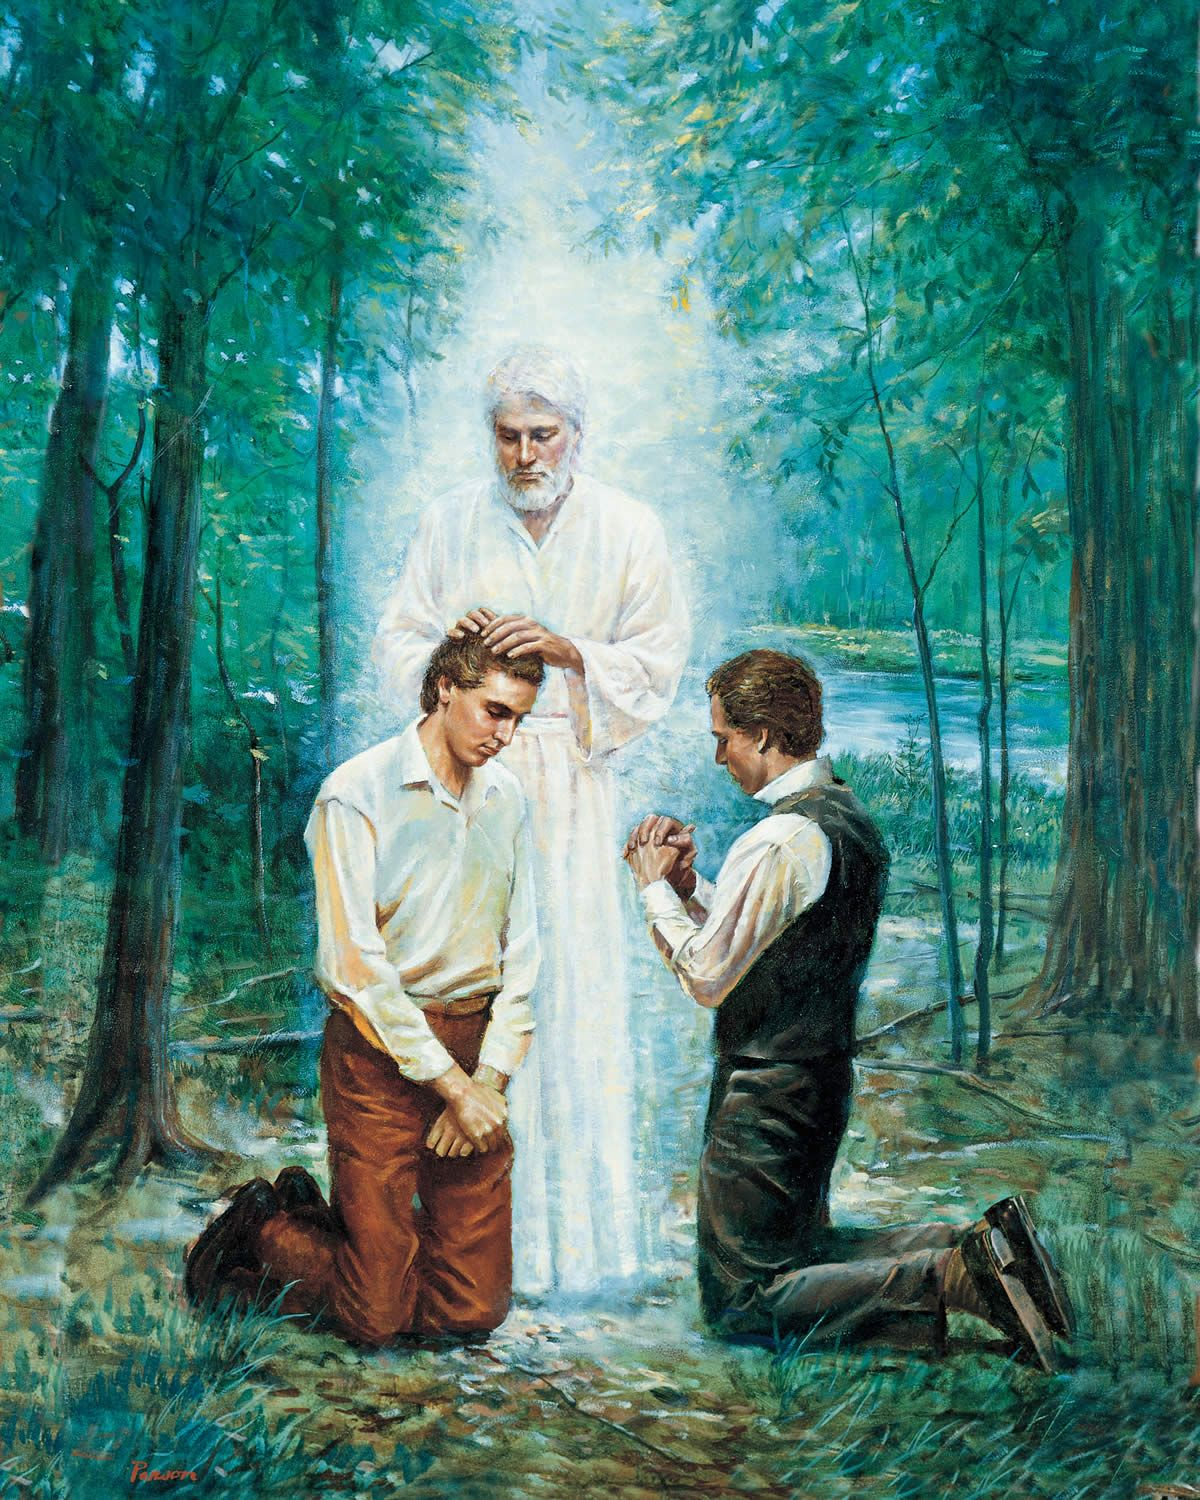 Joseph Smith and Oliver Cowdery receive the Aaronic Priesthood by the laying on of hands from John the Baptist